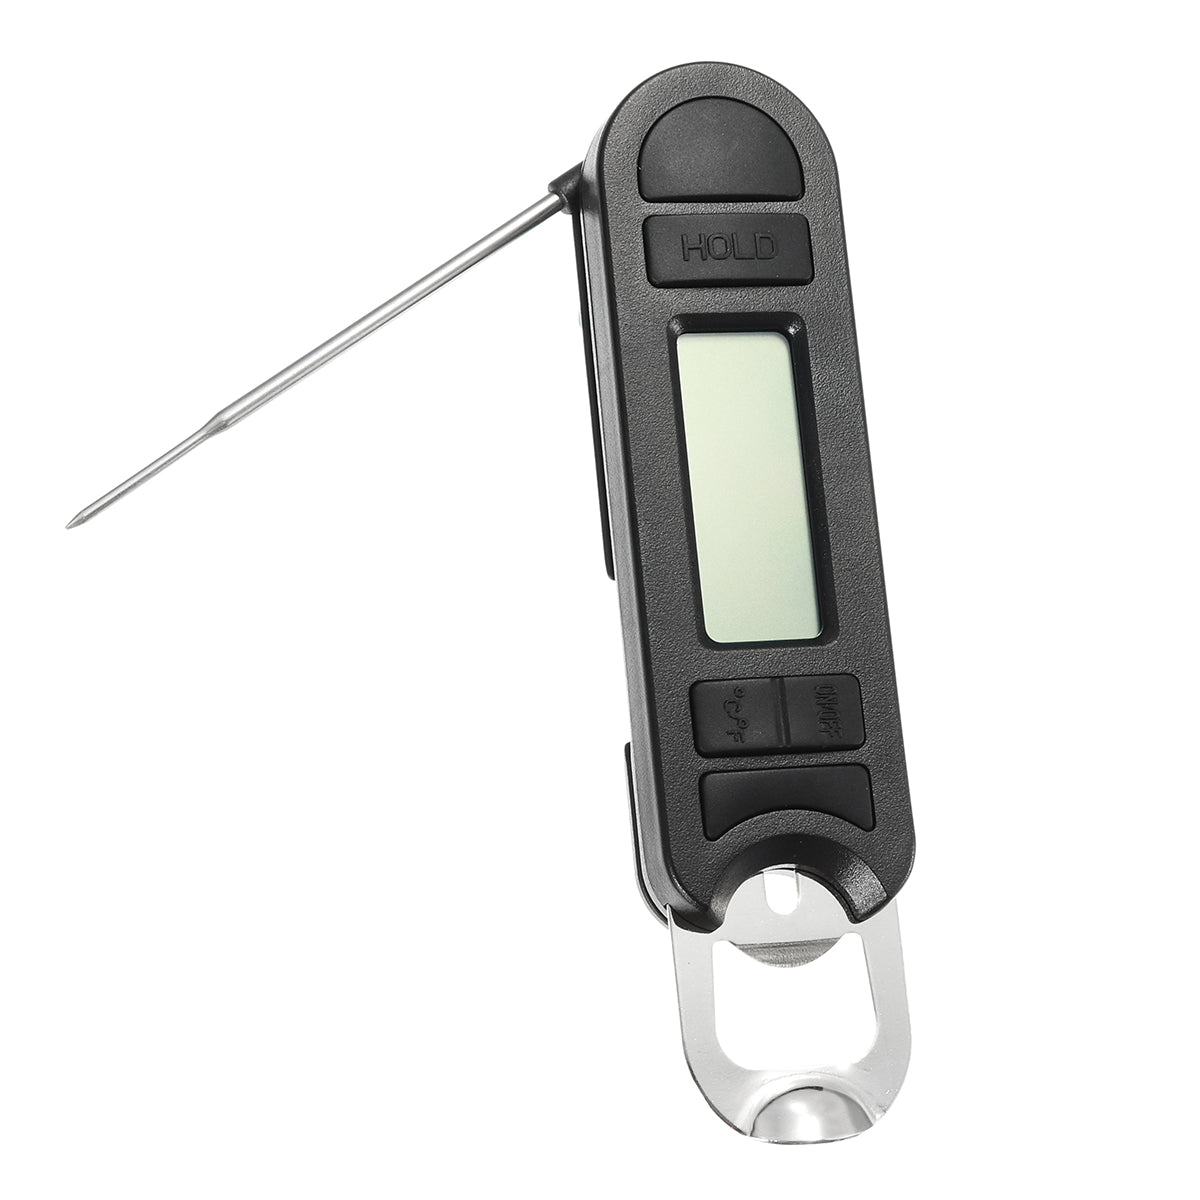 Digital Fold BBQ Thermometer with Bottle Opener Food Kitchen Water Oil Temperature Meter Tools